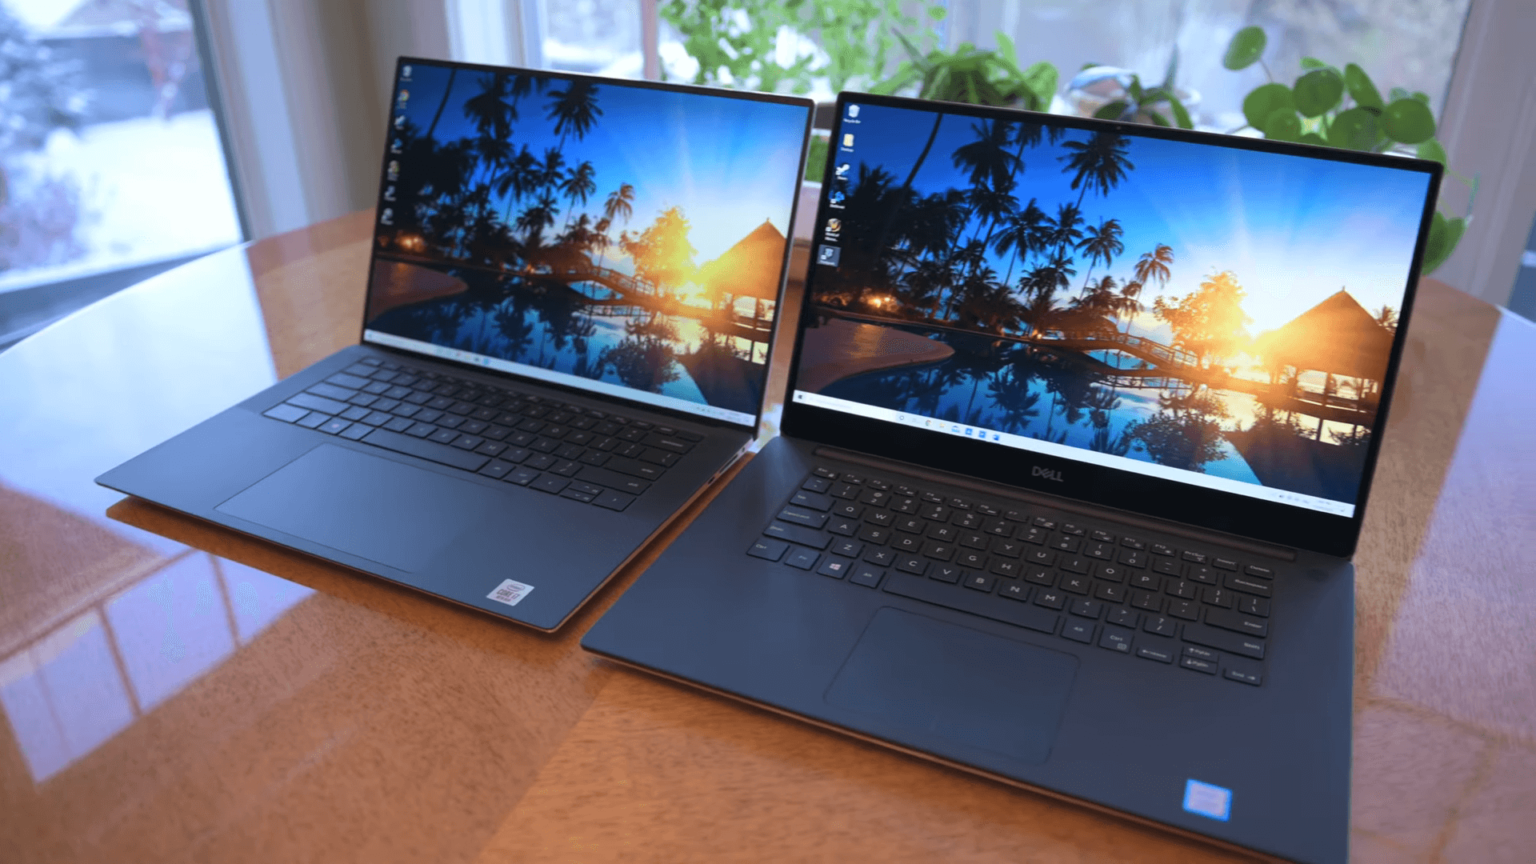 Dell XPS 15 7590 vs 9500: Which One You Should Choose, the New or Old